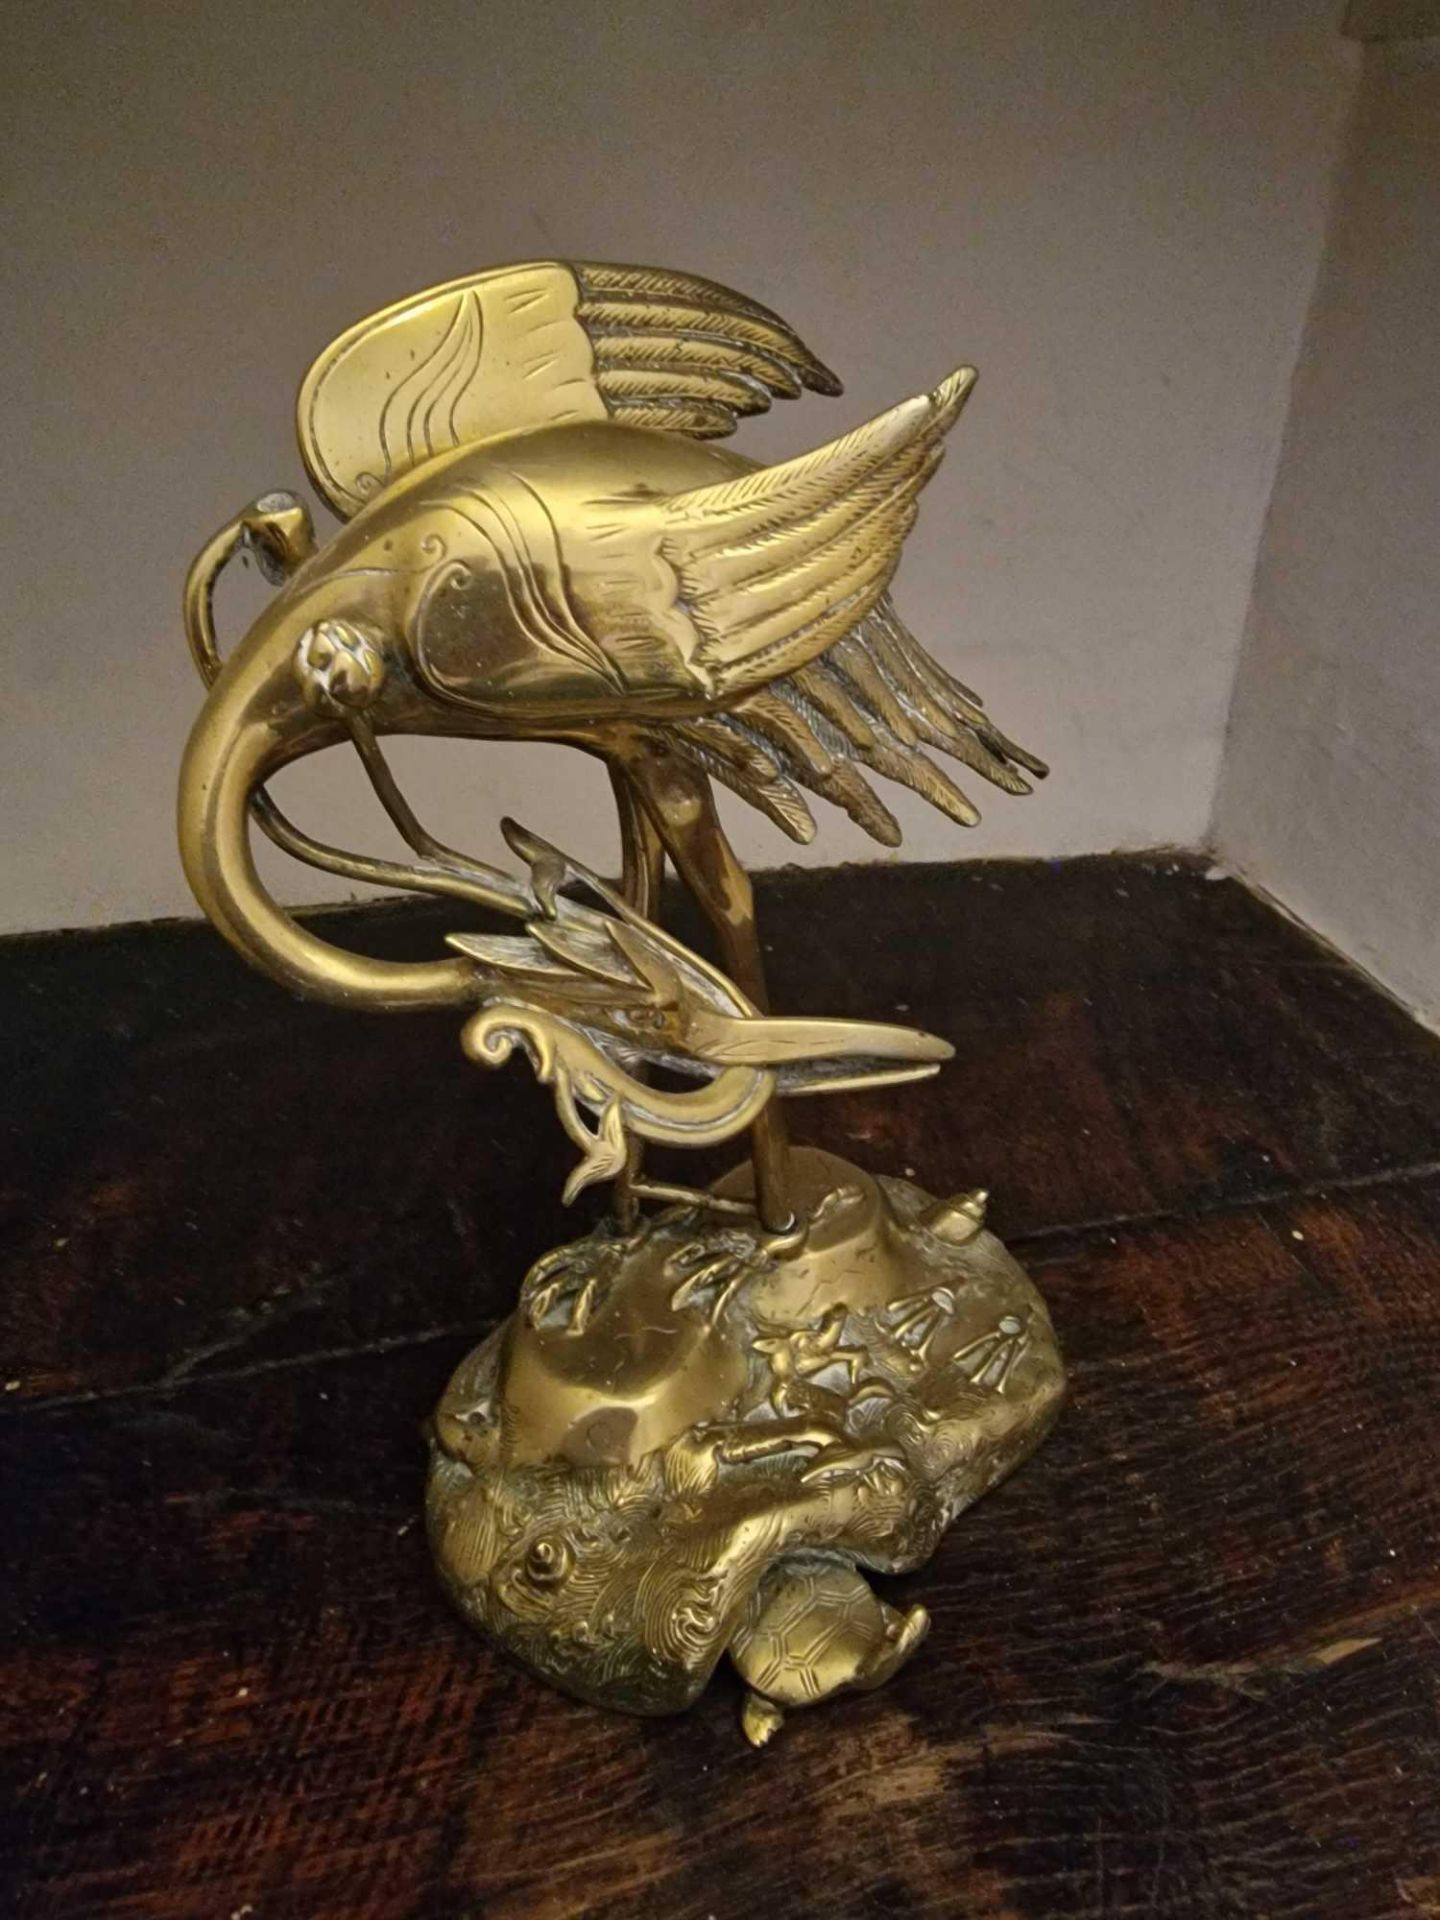 Brass Crane And Turtle Decorative Objet In Japanese Folklore This Combination Symbolises Enduring